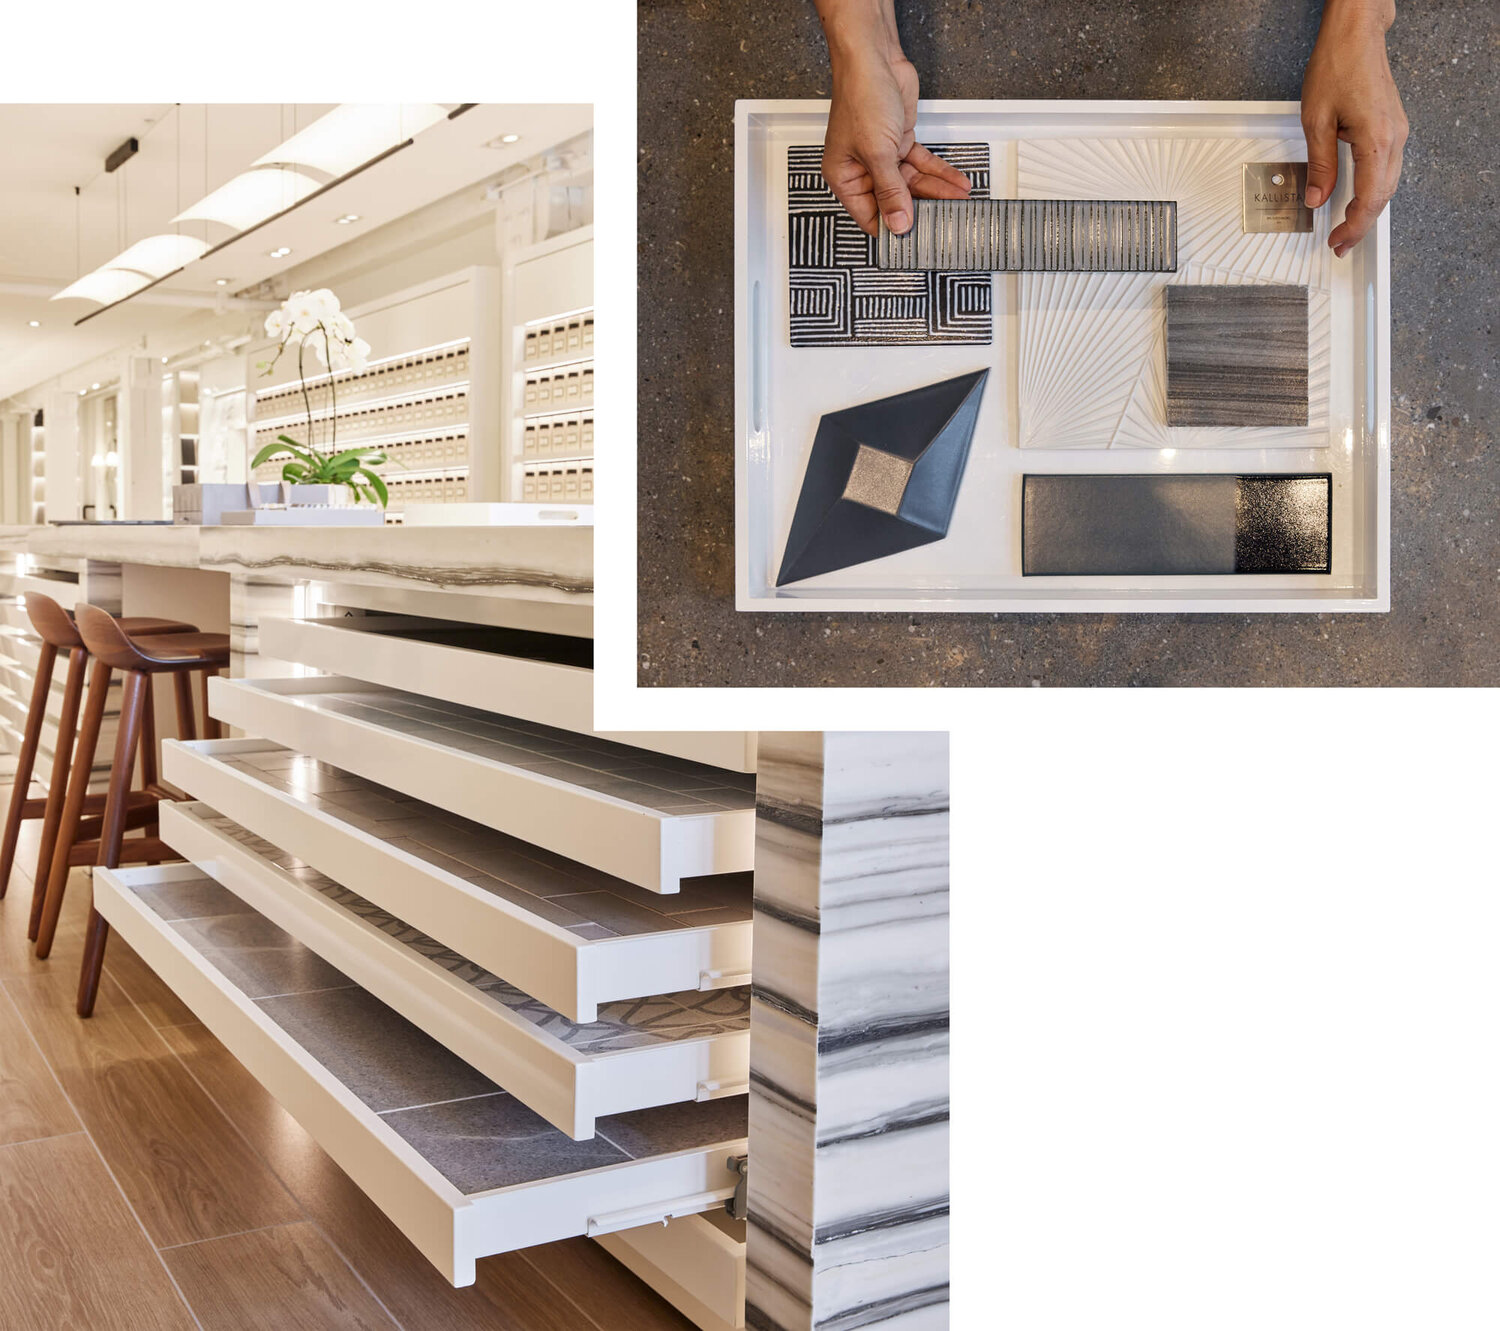 Two images: larger image shows drawers of tiles that pull out for easy display. Other Image is a closeup of someone putting different tiles together in a tray to review.